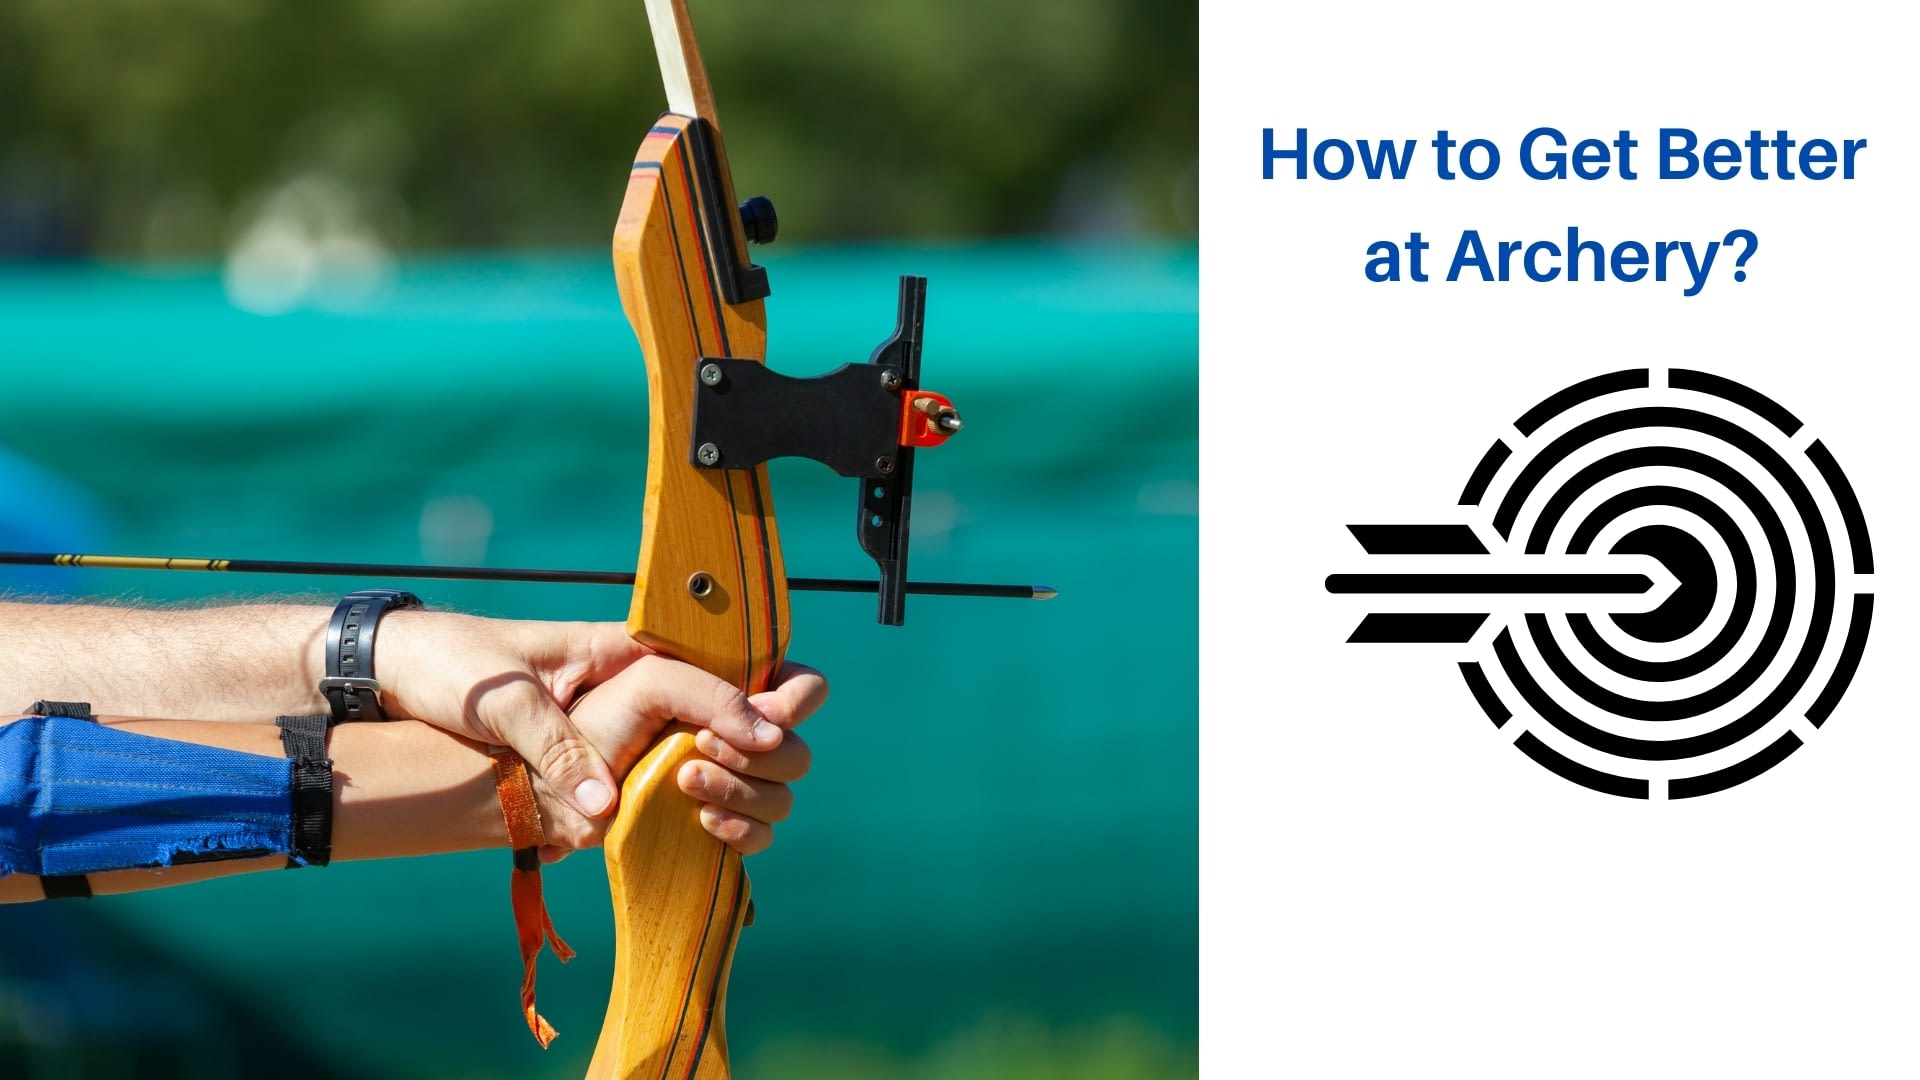 How to Get Better at Archery